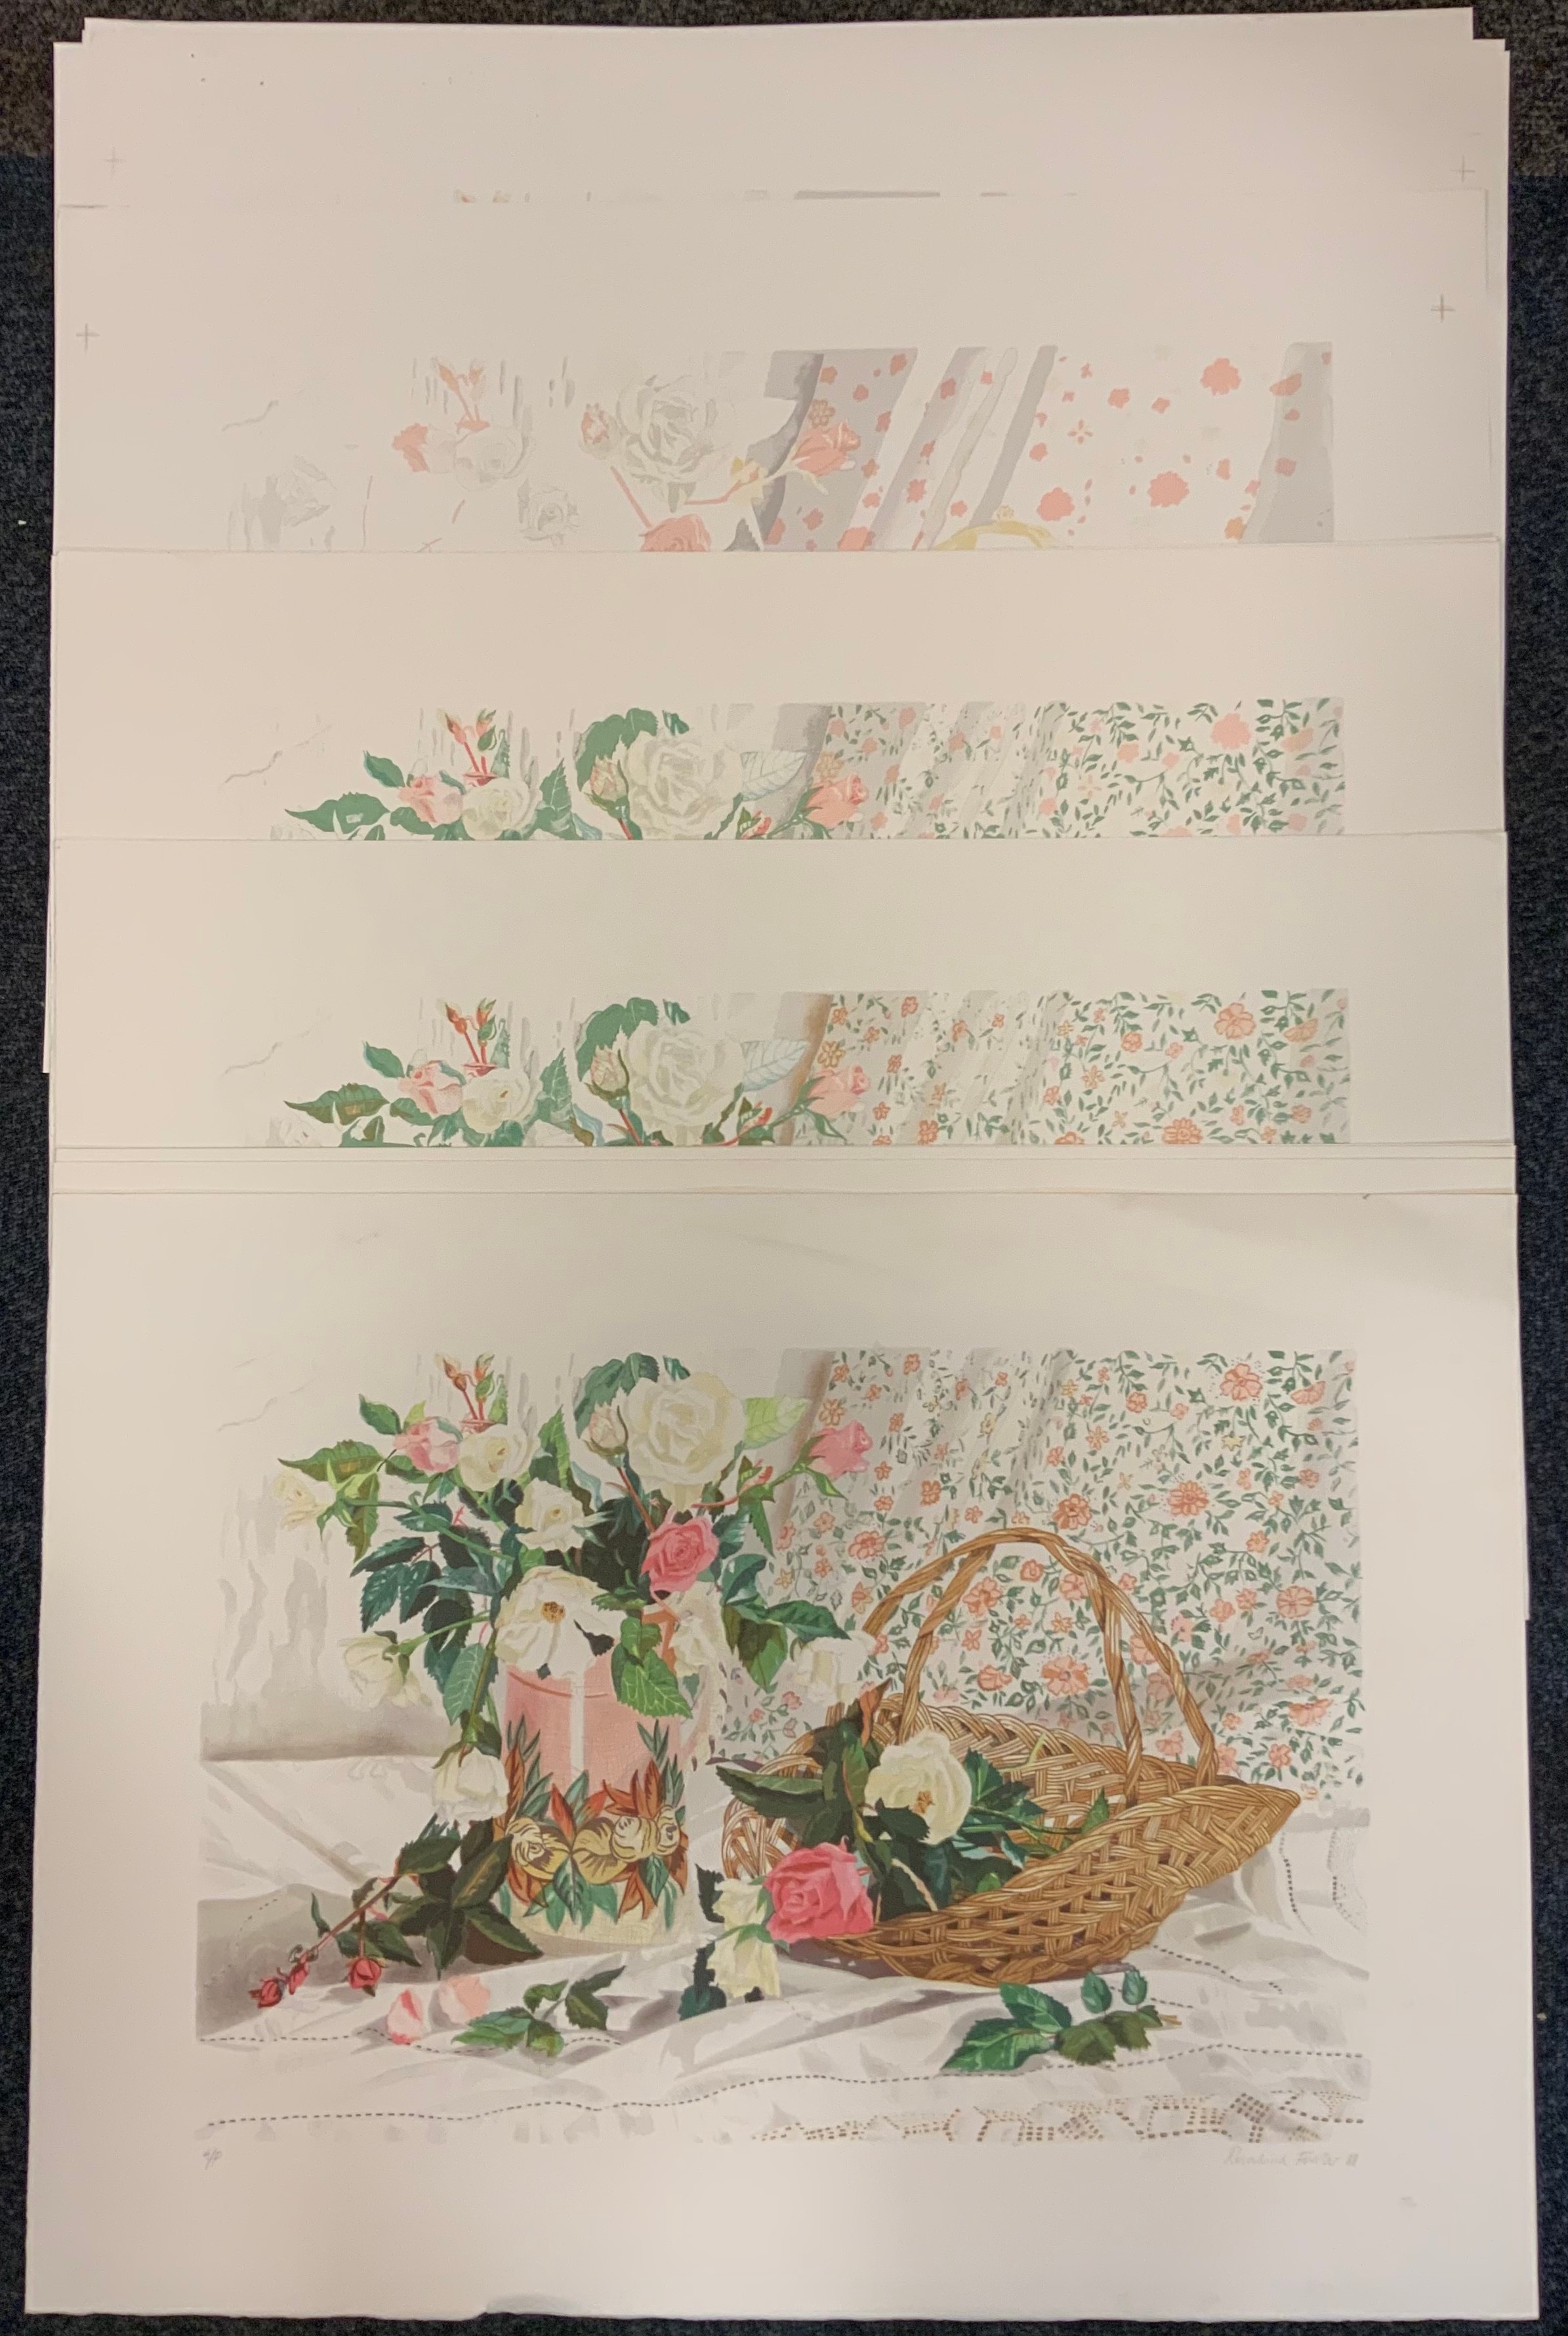 Rosalind Forster, by and after, 'Basket and jug of flowers', artist's proof, along with an